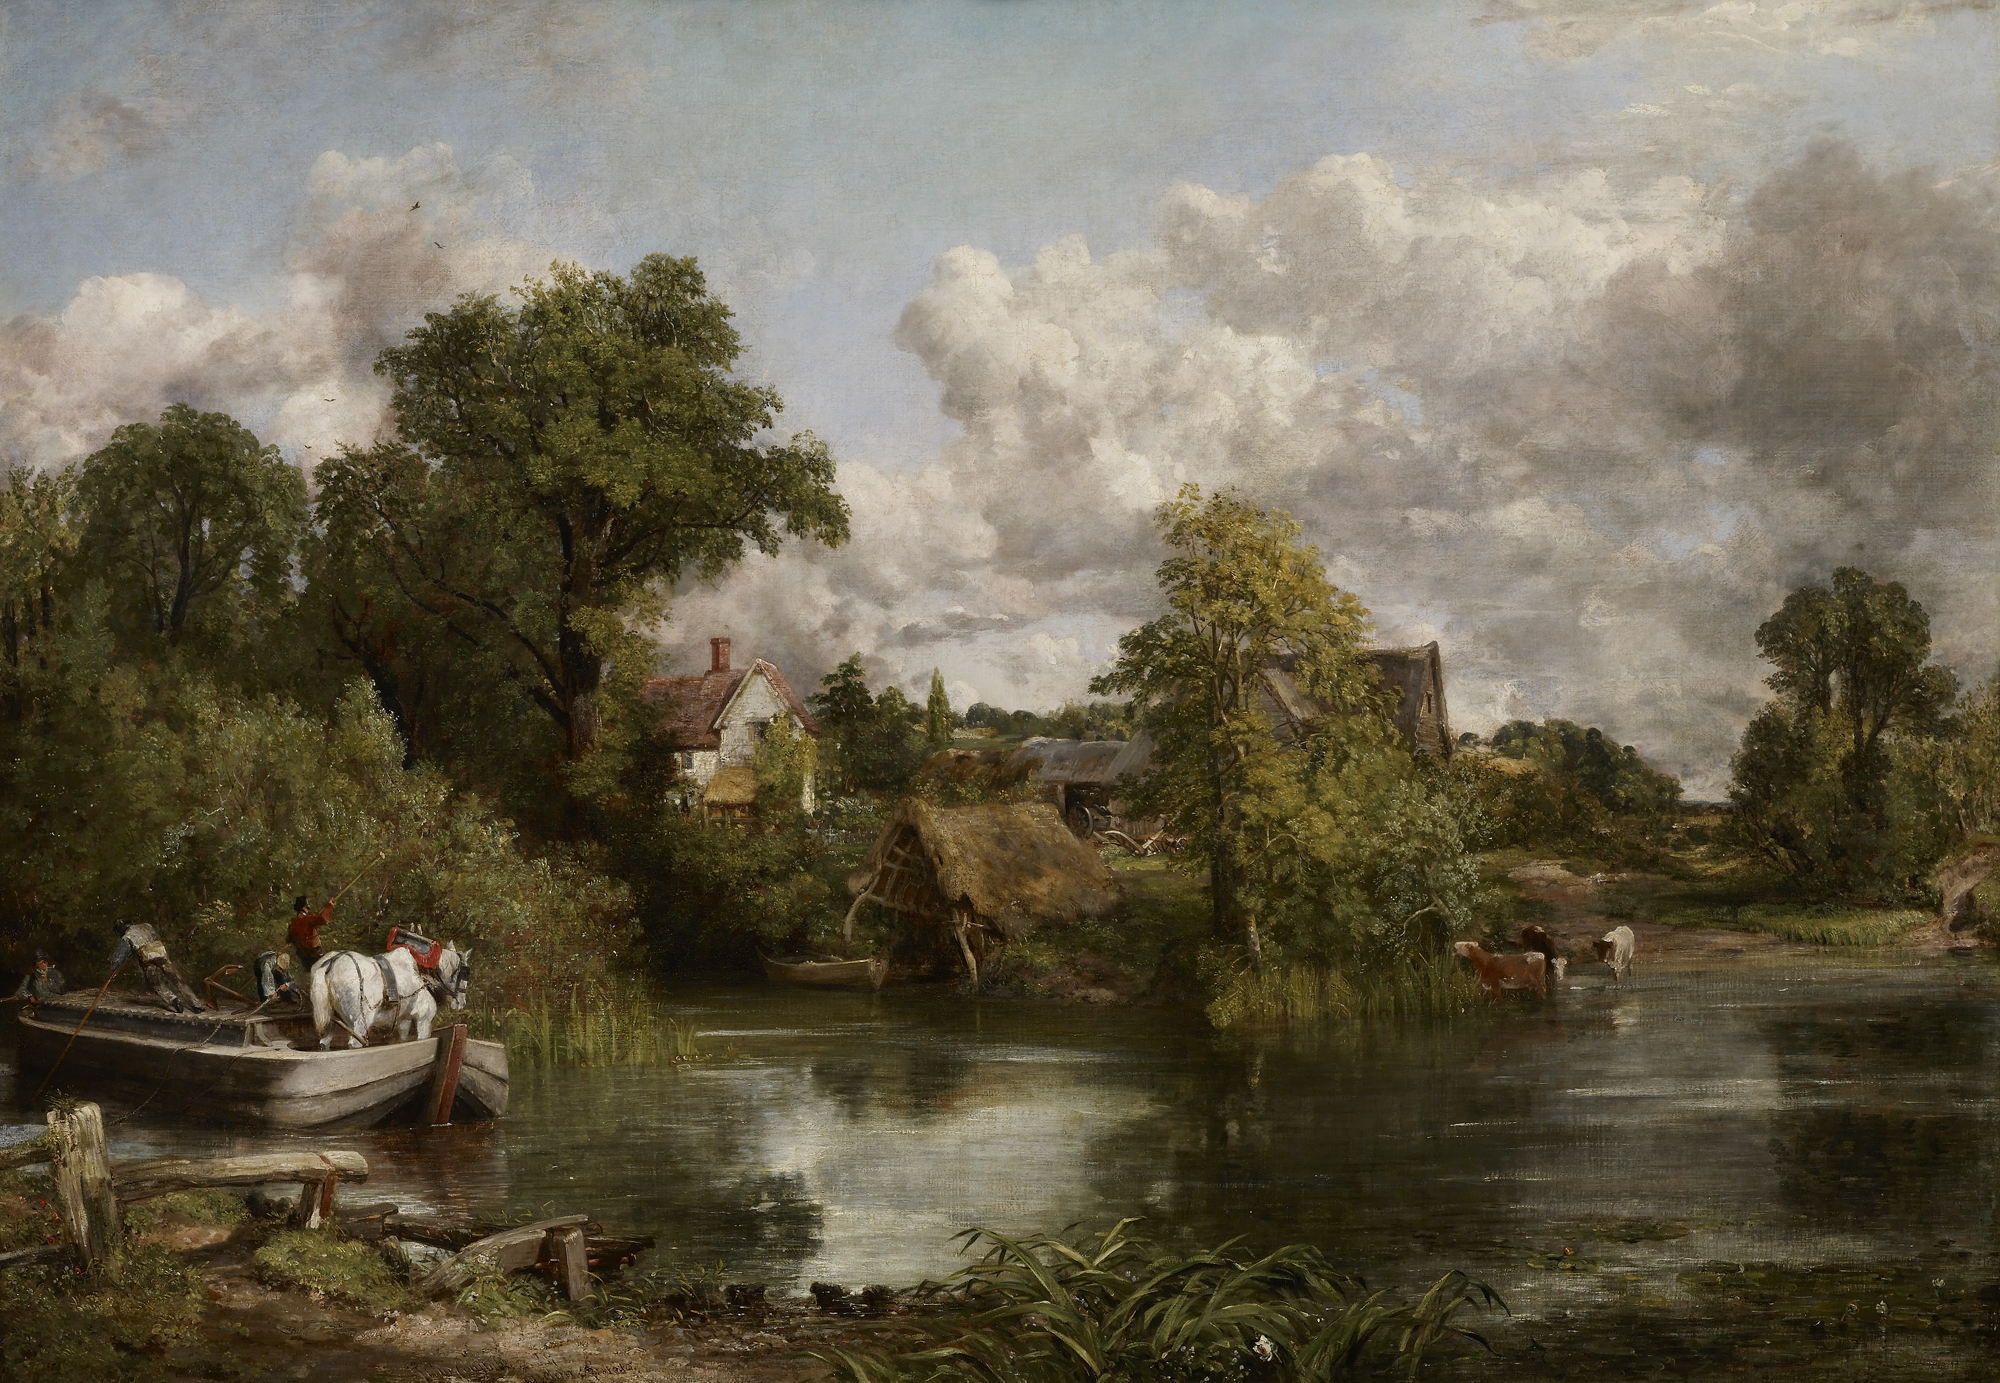 The White Horse by John Constable - 1819 - 51 3/4 × 74 1/8 inches The Frick Collection